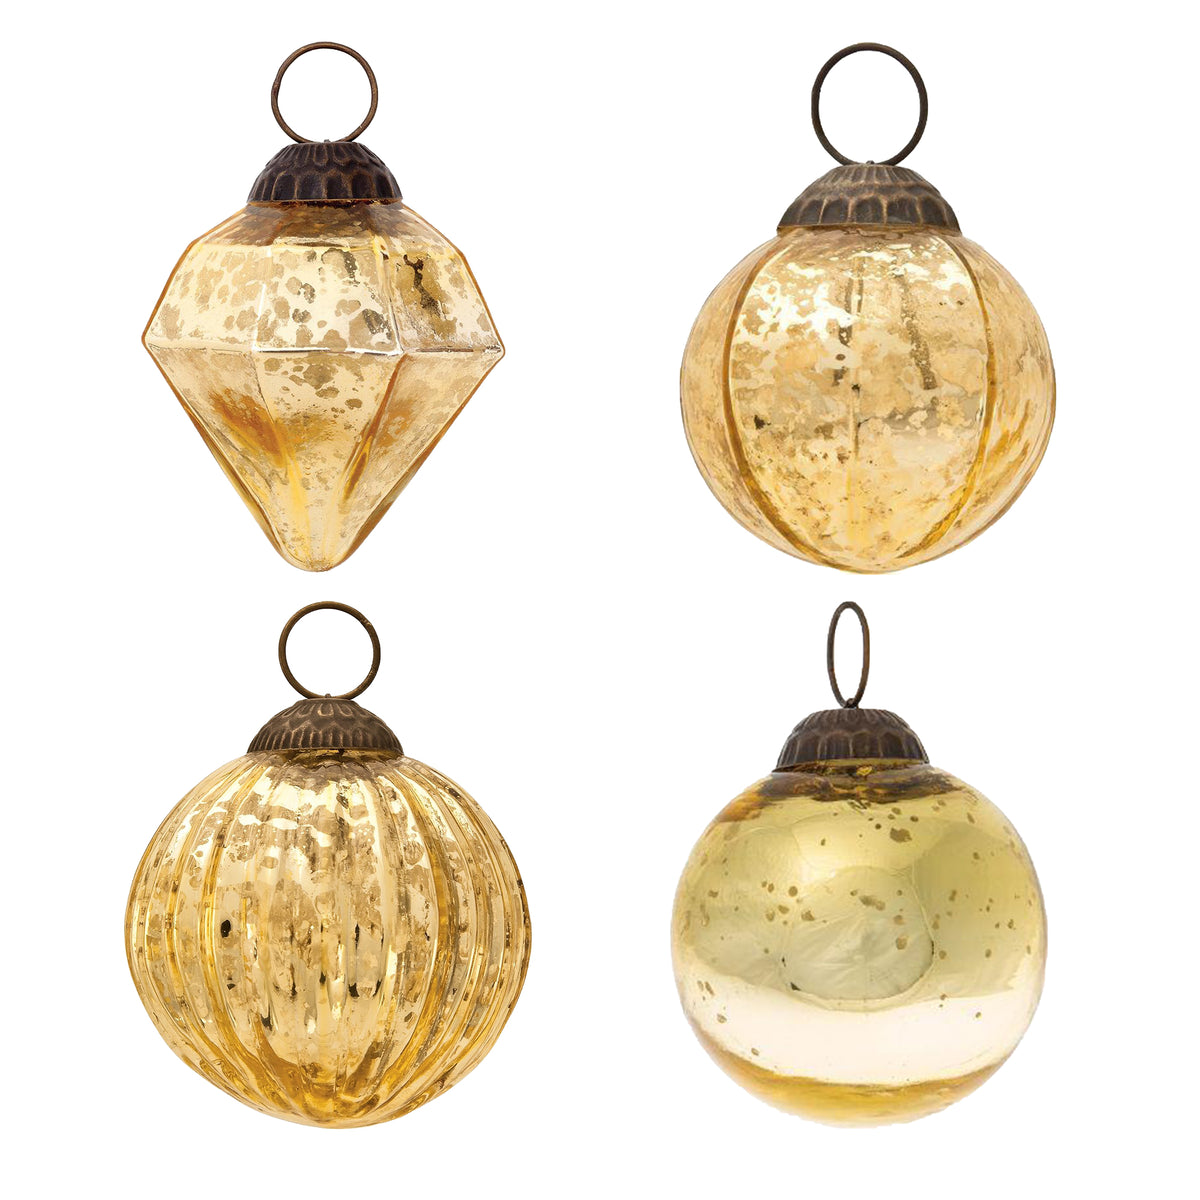 4 Pack | Gold Best of Show Assorted Ornaments Set - Great Gift Idea, Vintage-Style Decorations for Christmas, Special Occasions, Home Decor and Parties